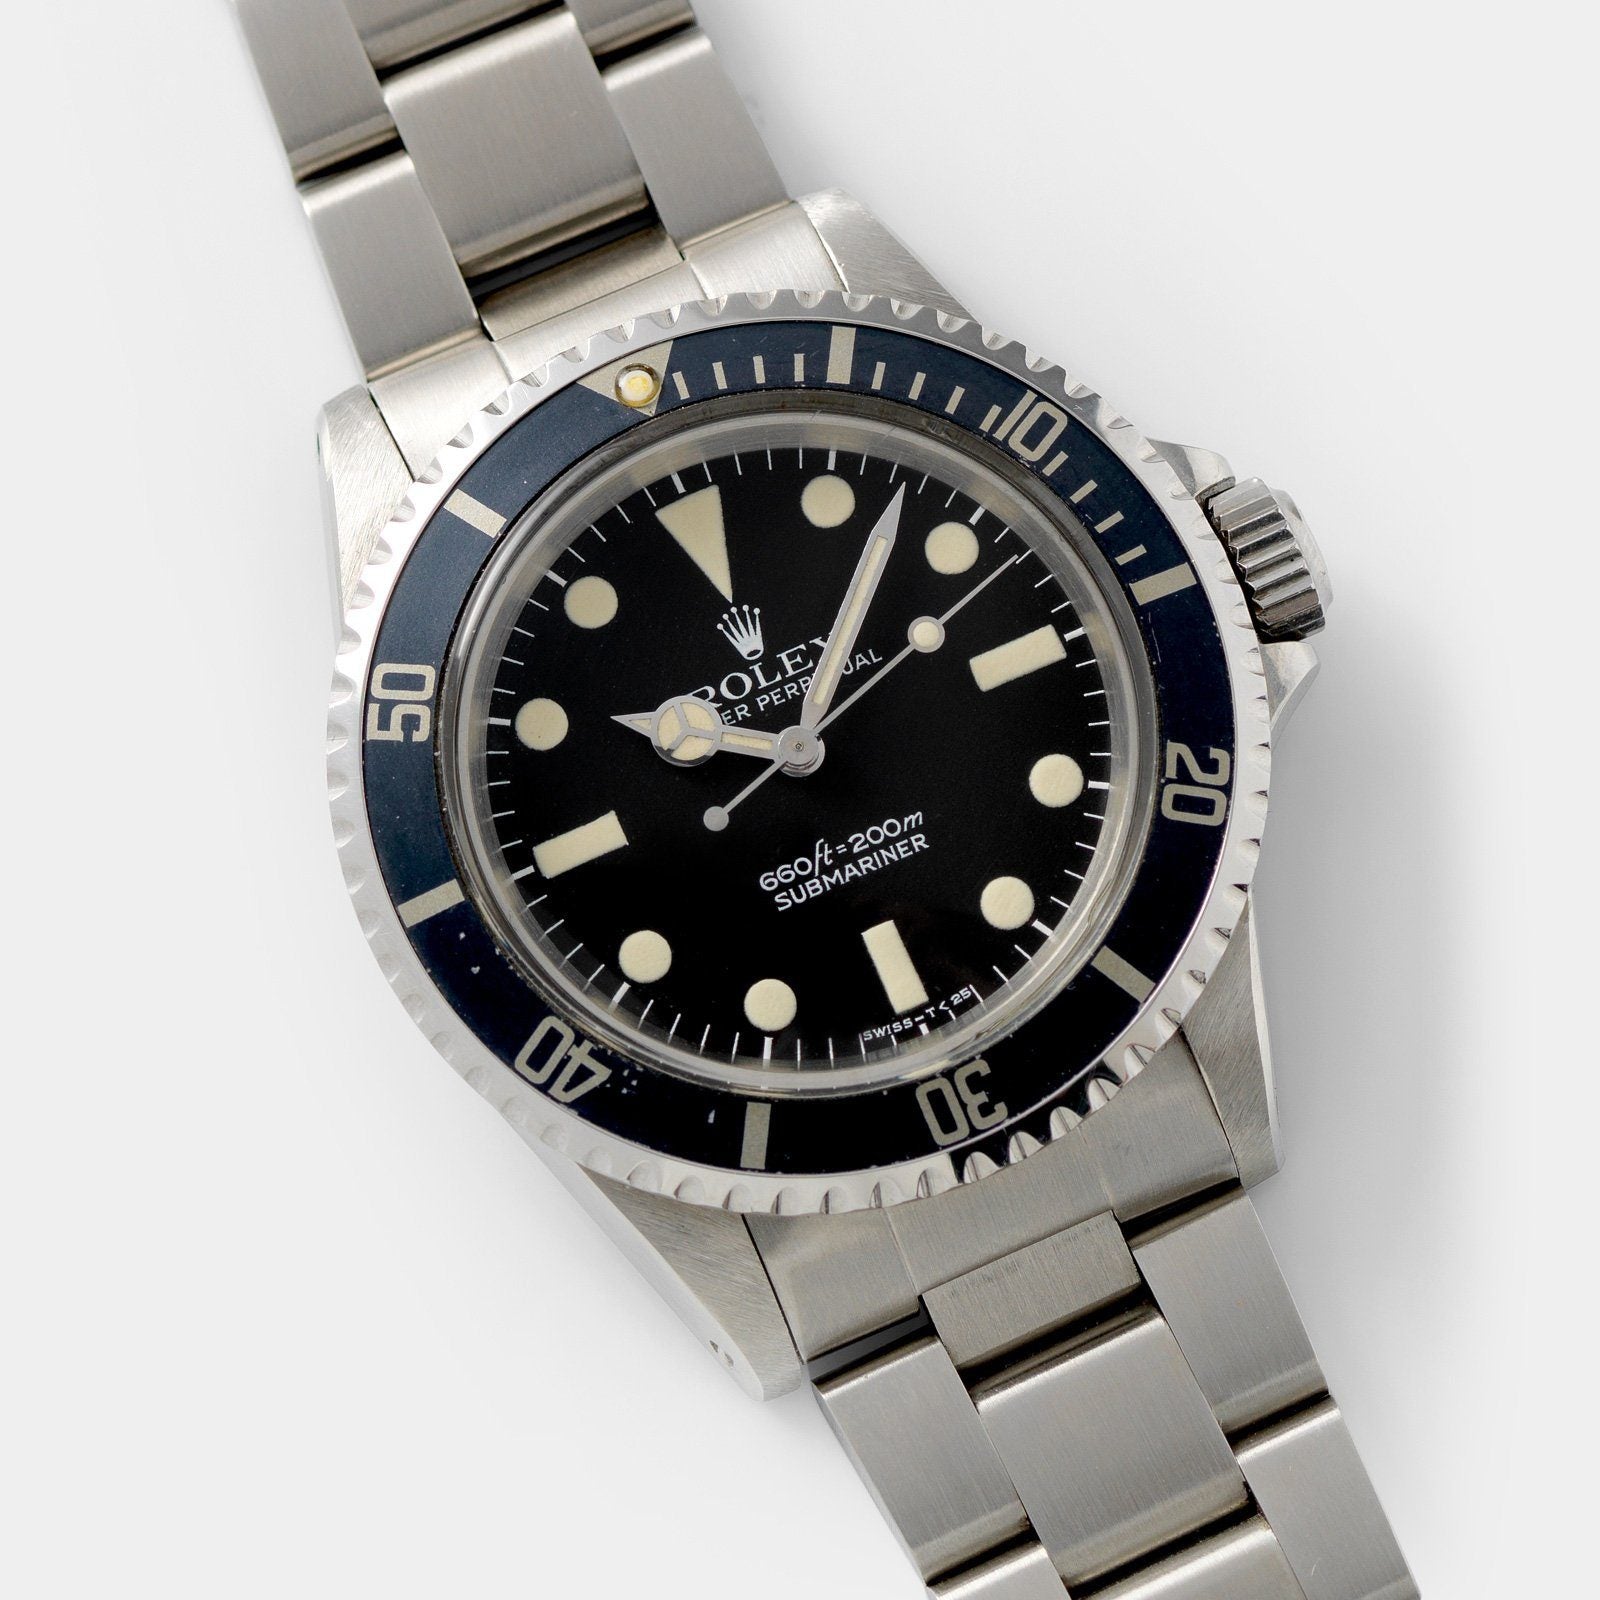 Rolex Submariner Mk 1 Maxi 5513 Box and Papers 40mm steel case